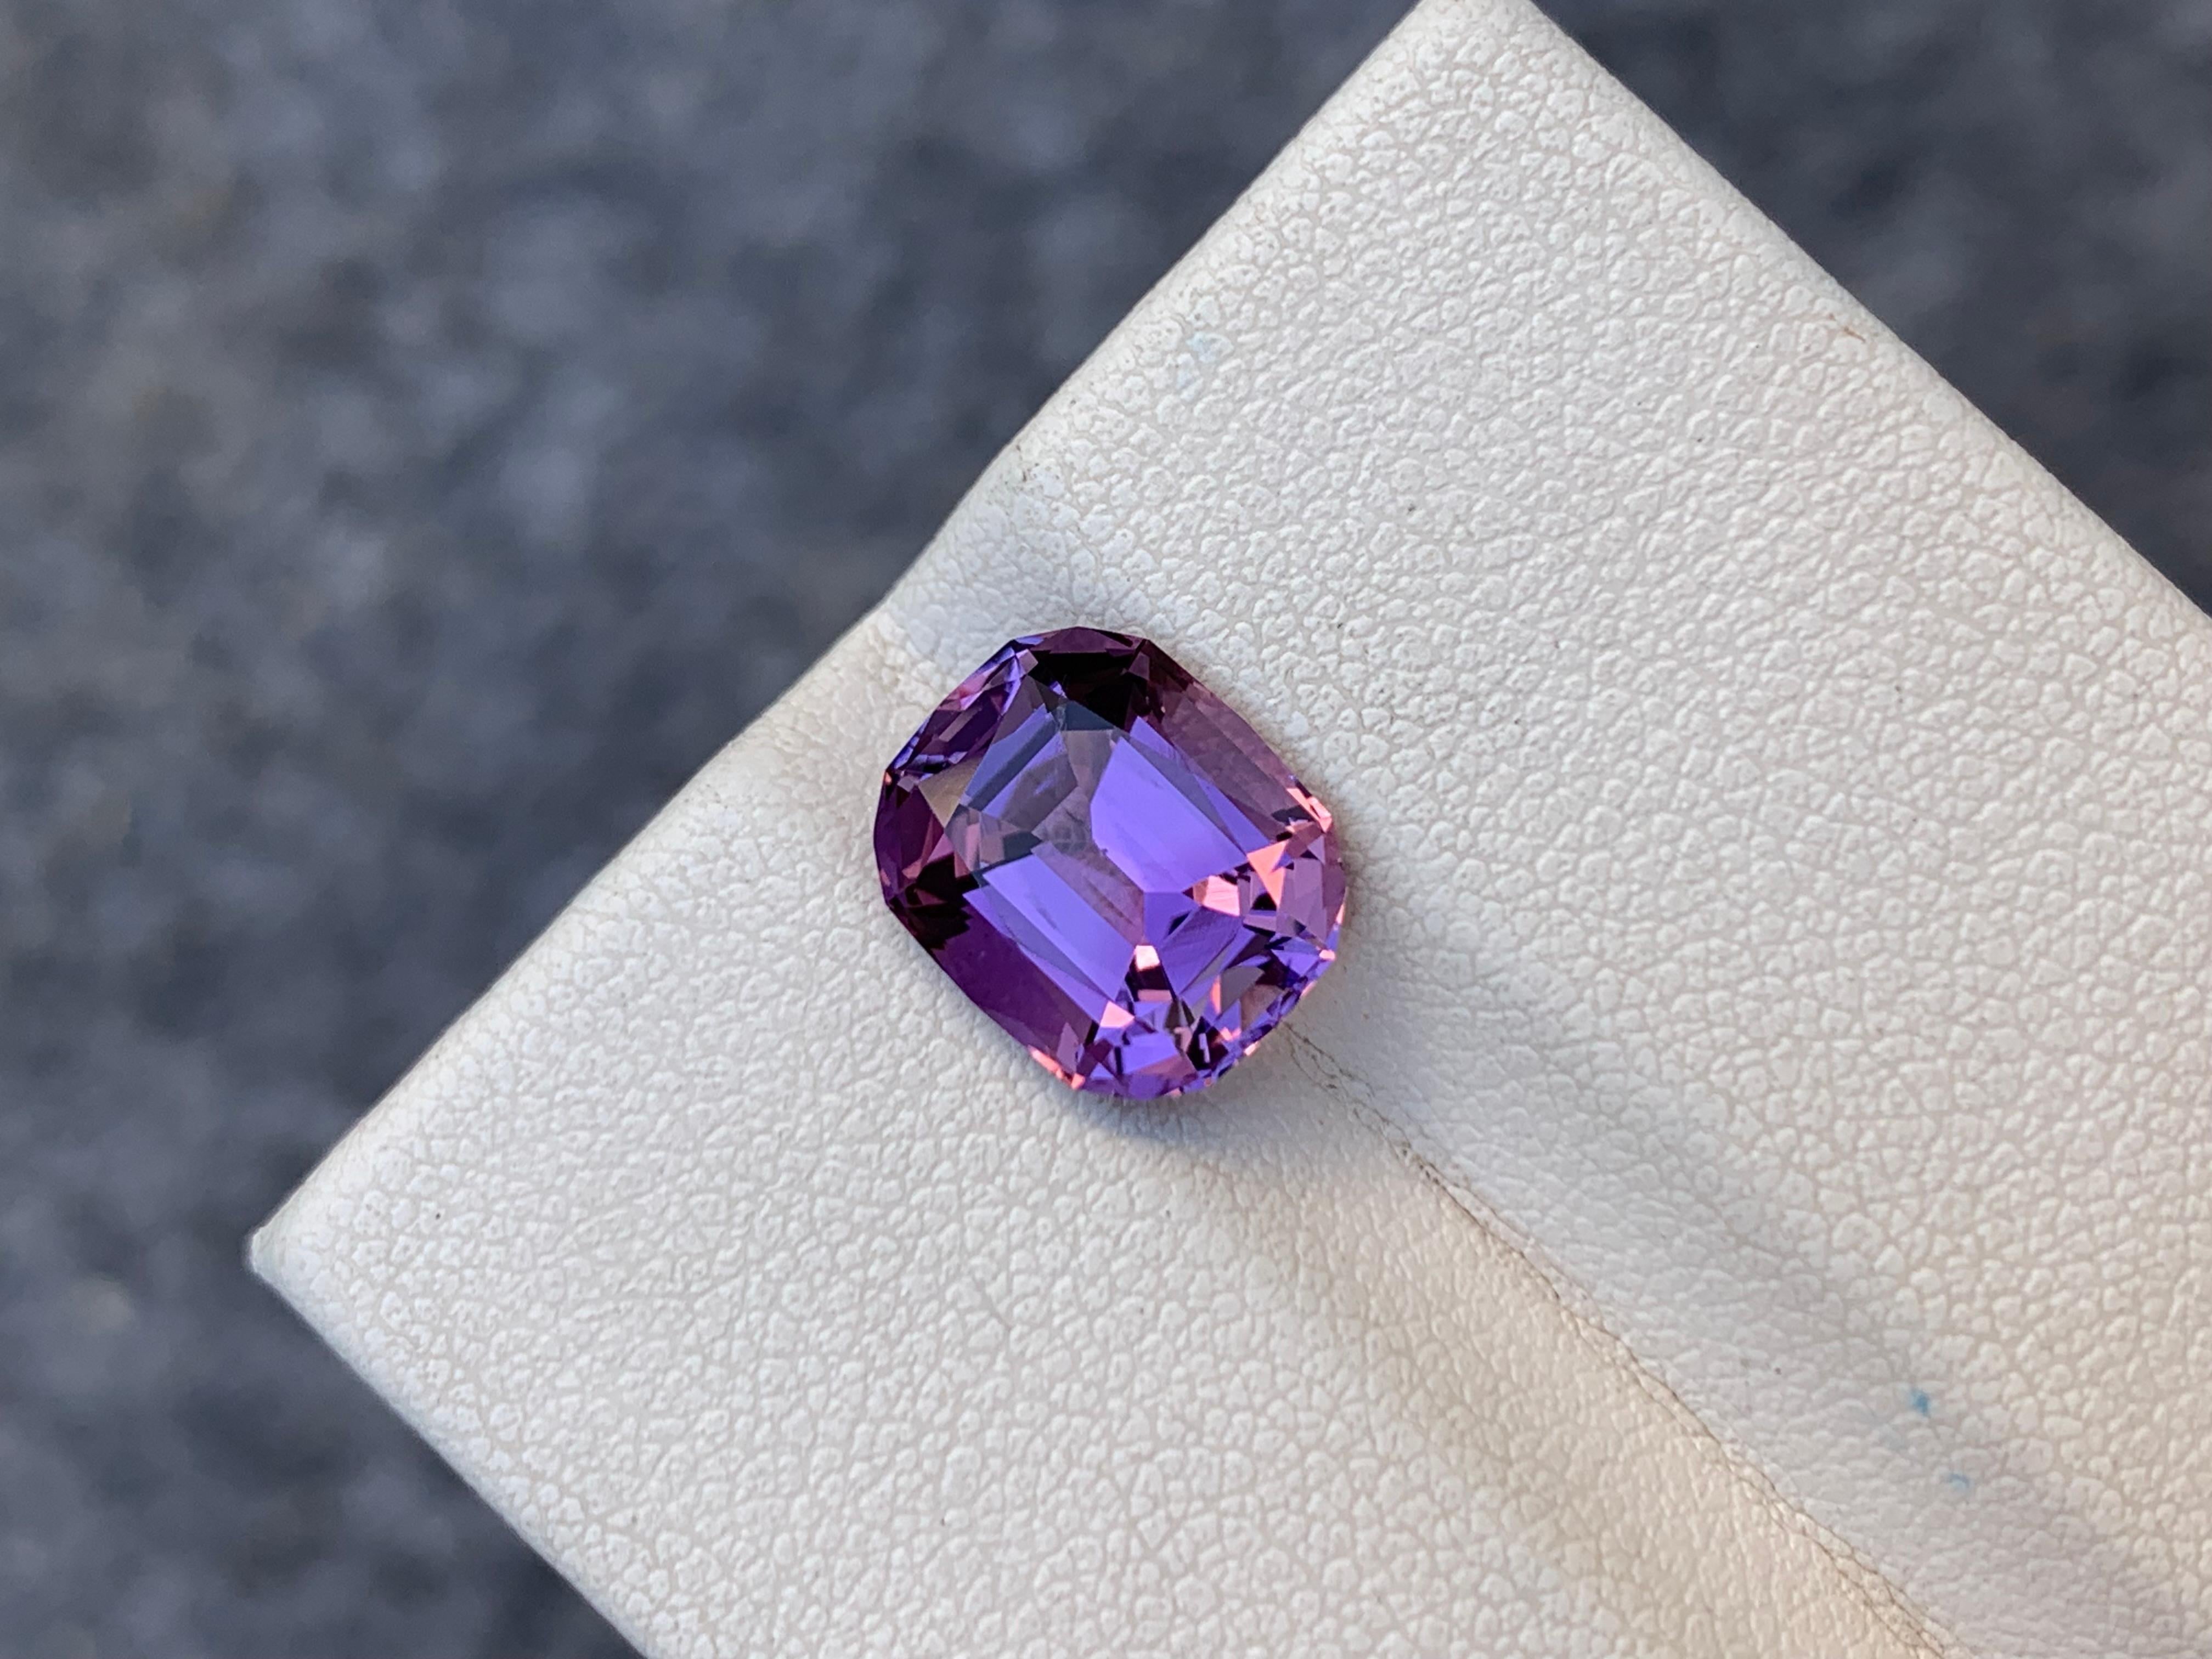 Loose Amethyst
Weight: 3.55 Carats
Dimension: 10.6 x 8.9 x 6.4 Mm
Colour: Purple
Origin: Brazil
Treatment: Non
Certificate: On Demand
Shape: Cushion 

Amethyst, a stunning variety of quartz known for its mesmerizing purple hue, has captivated humans